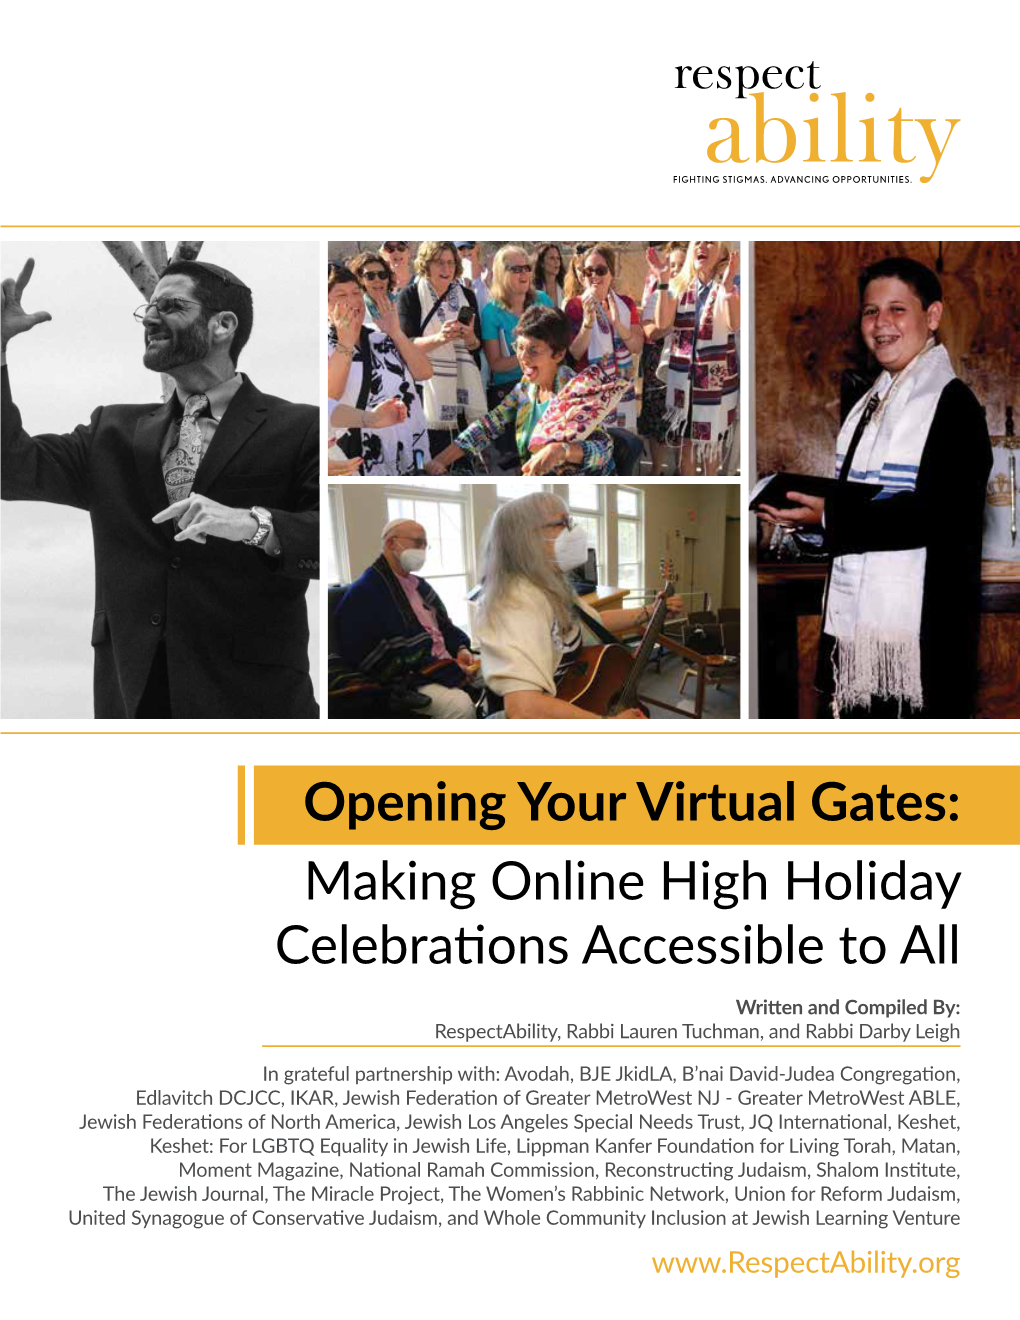 Opening Your Virtual Gates: Making Online High Holiday Celebrations Accessible to All